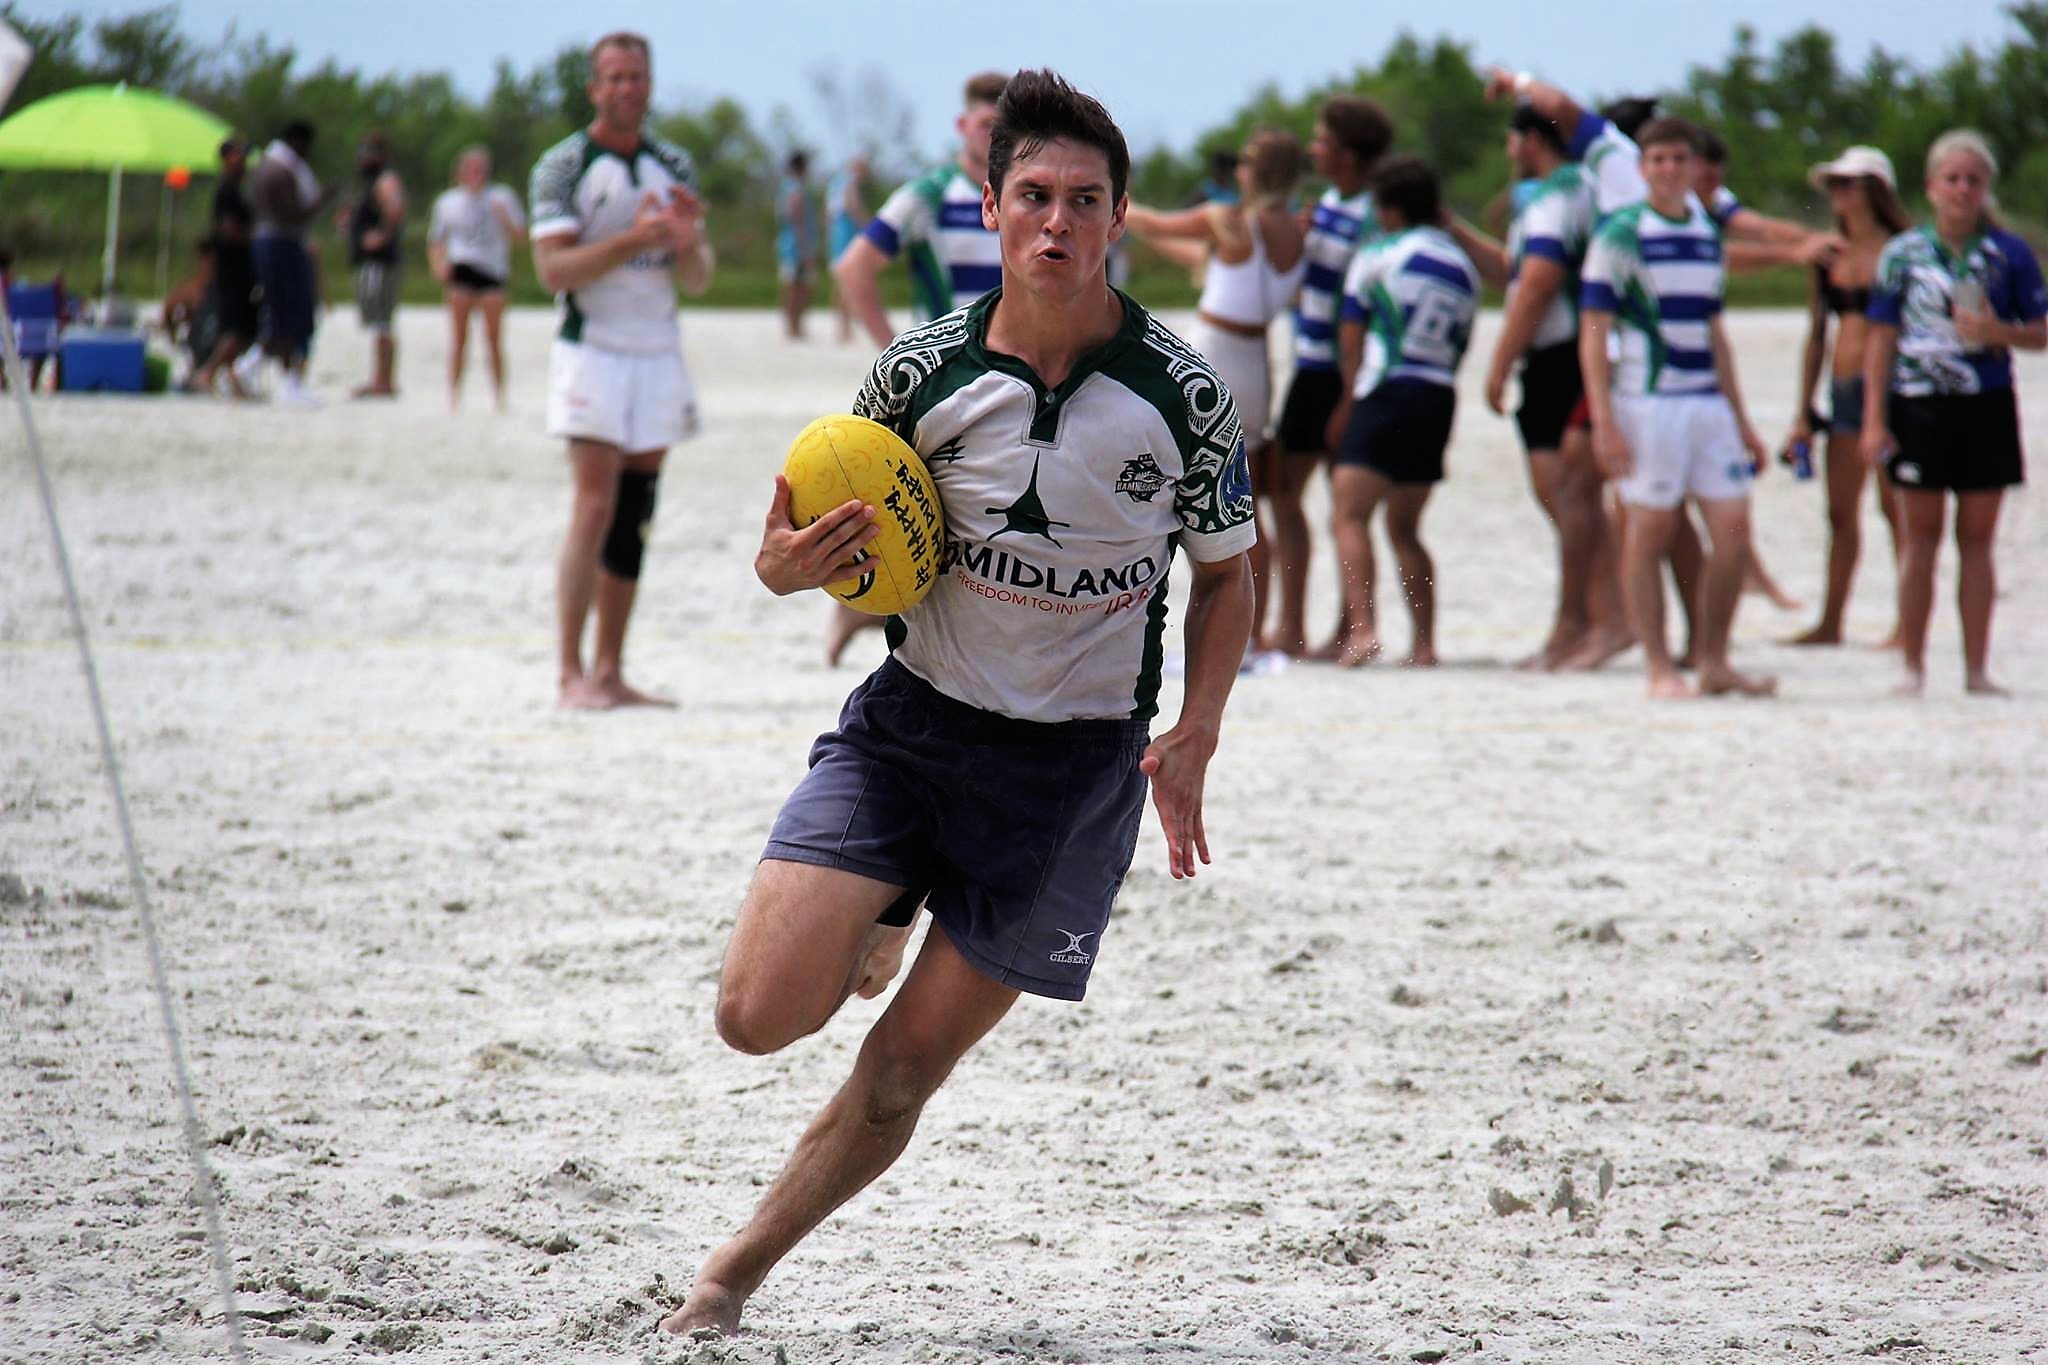 beerfoot-beach-rugby-score